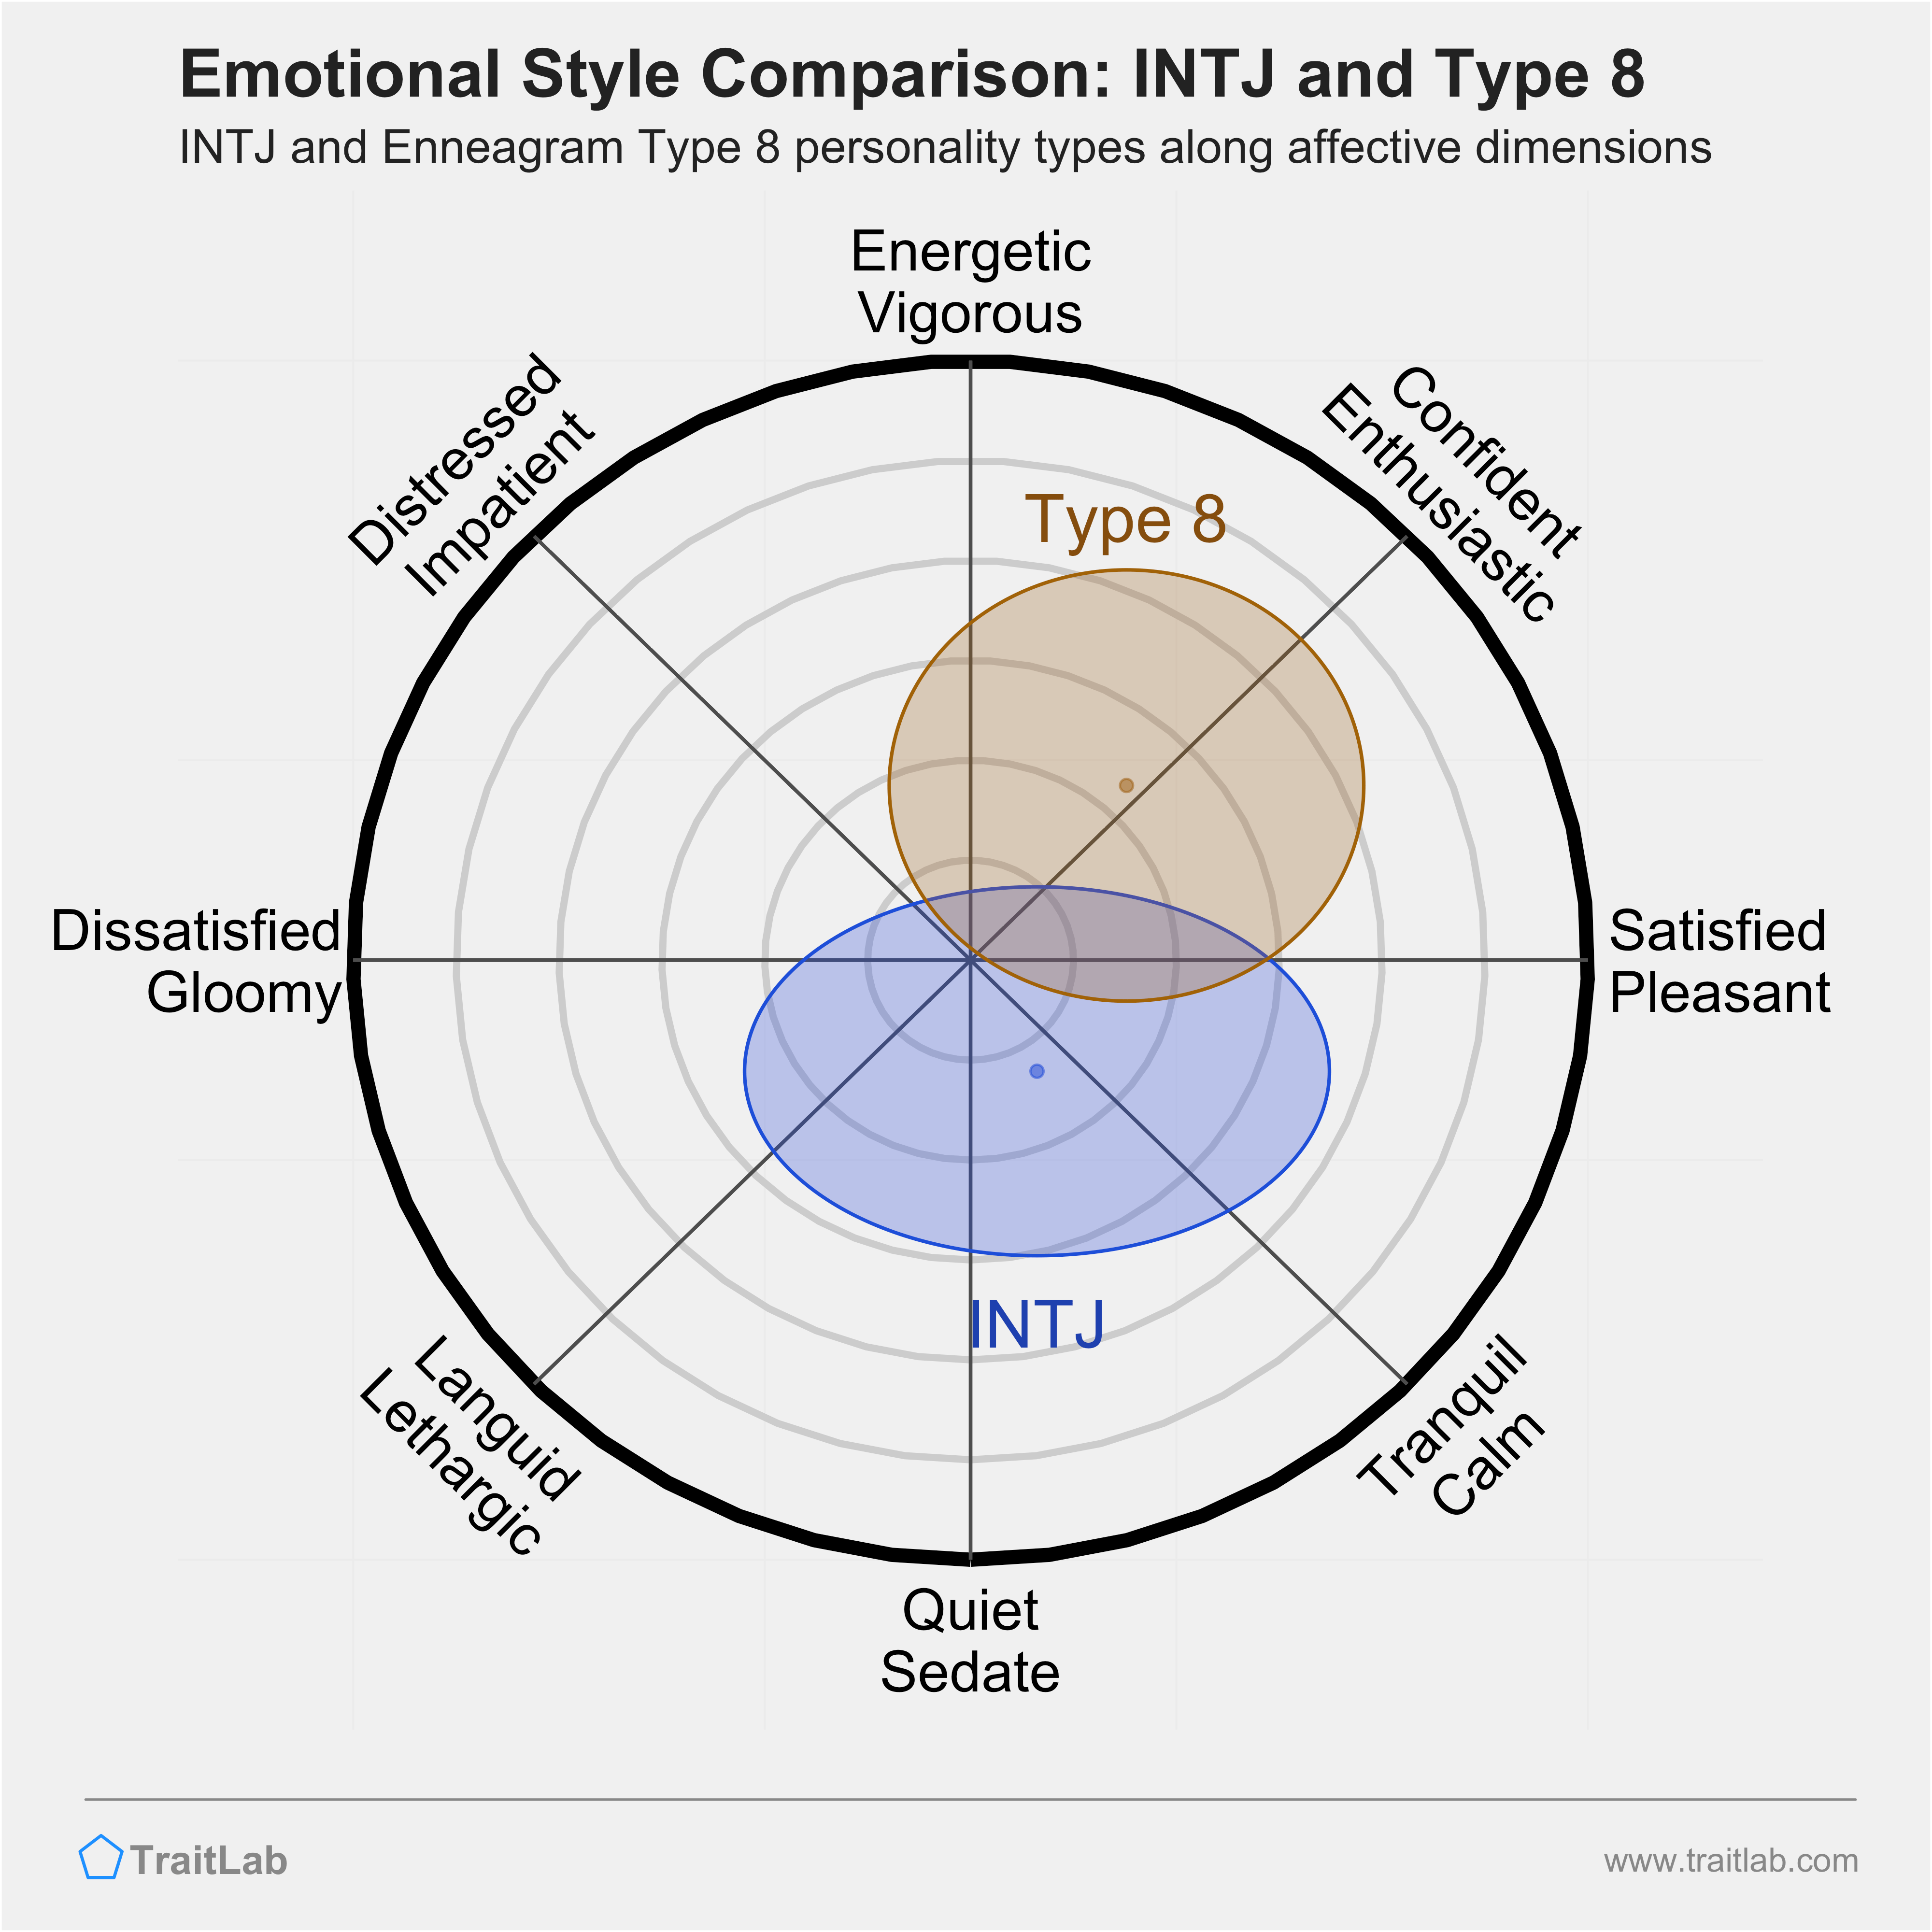 INTJ and Type 8 comparison across emotional (affective) dimensions